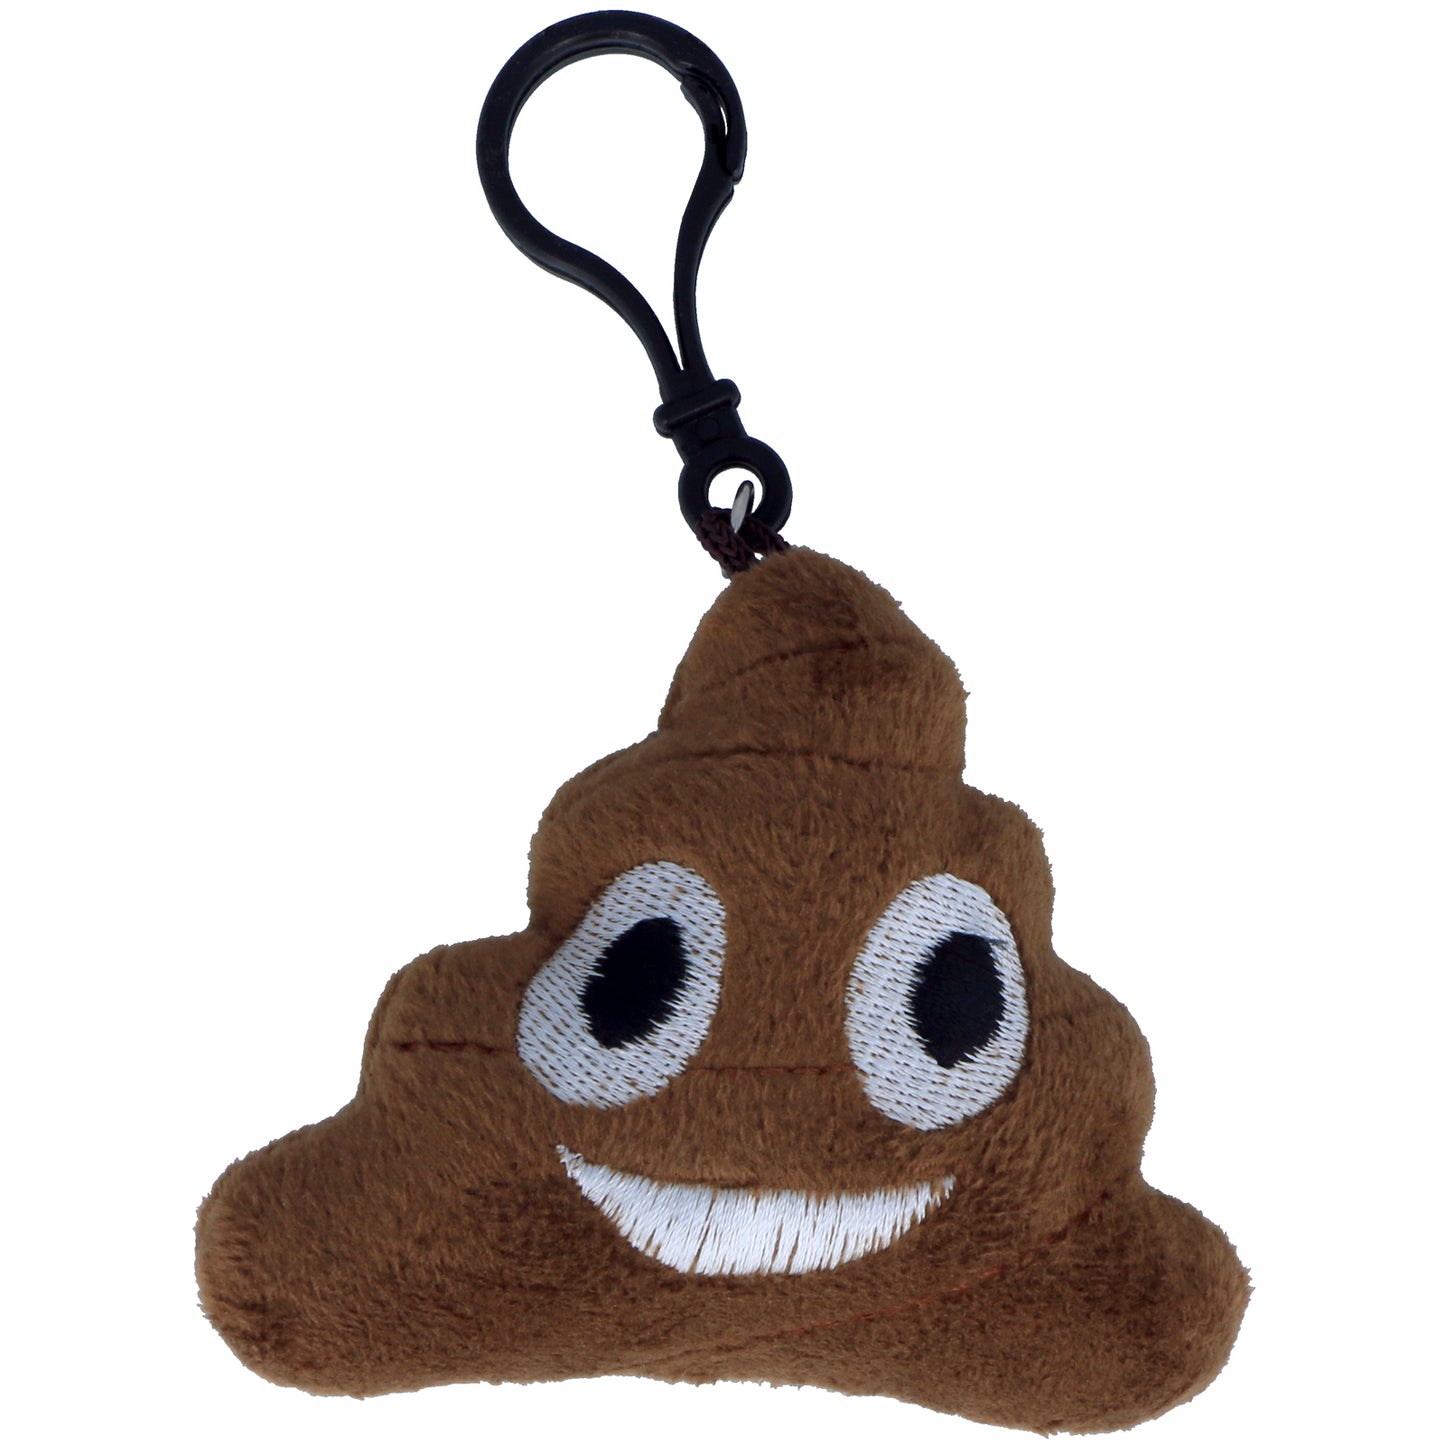 Poop Emoji Plush Key Chain Accessory Clip On Assorted Emotions - Random Style Pick (1 Count)